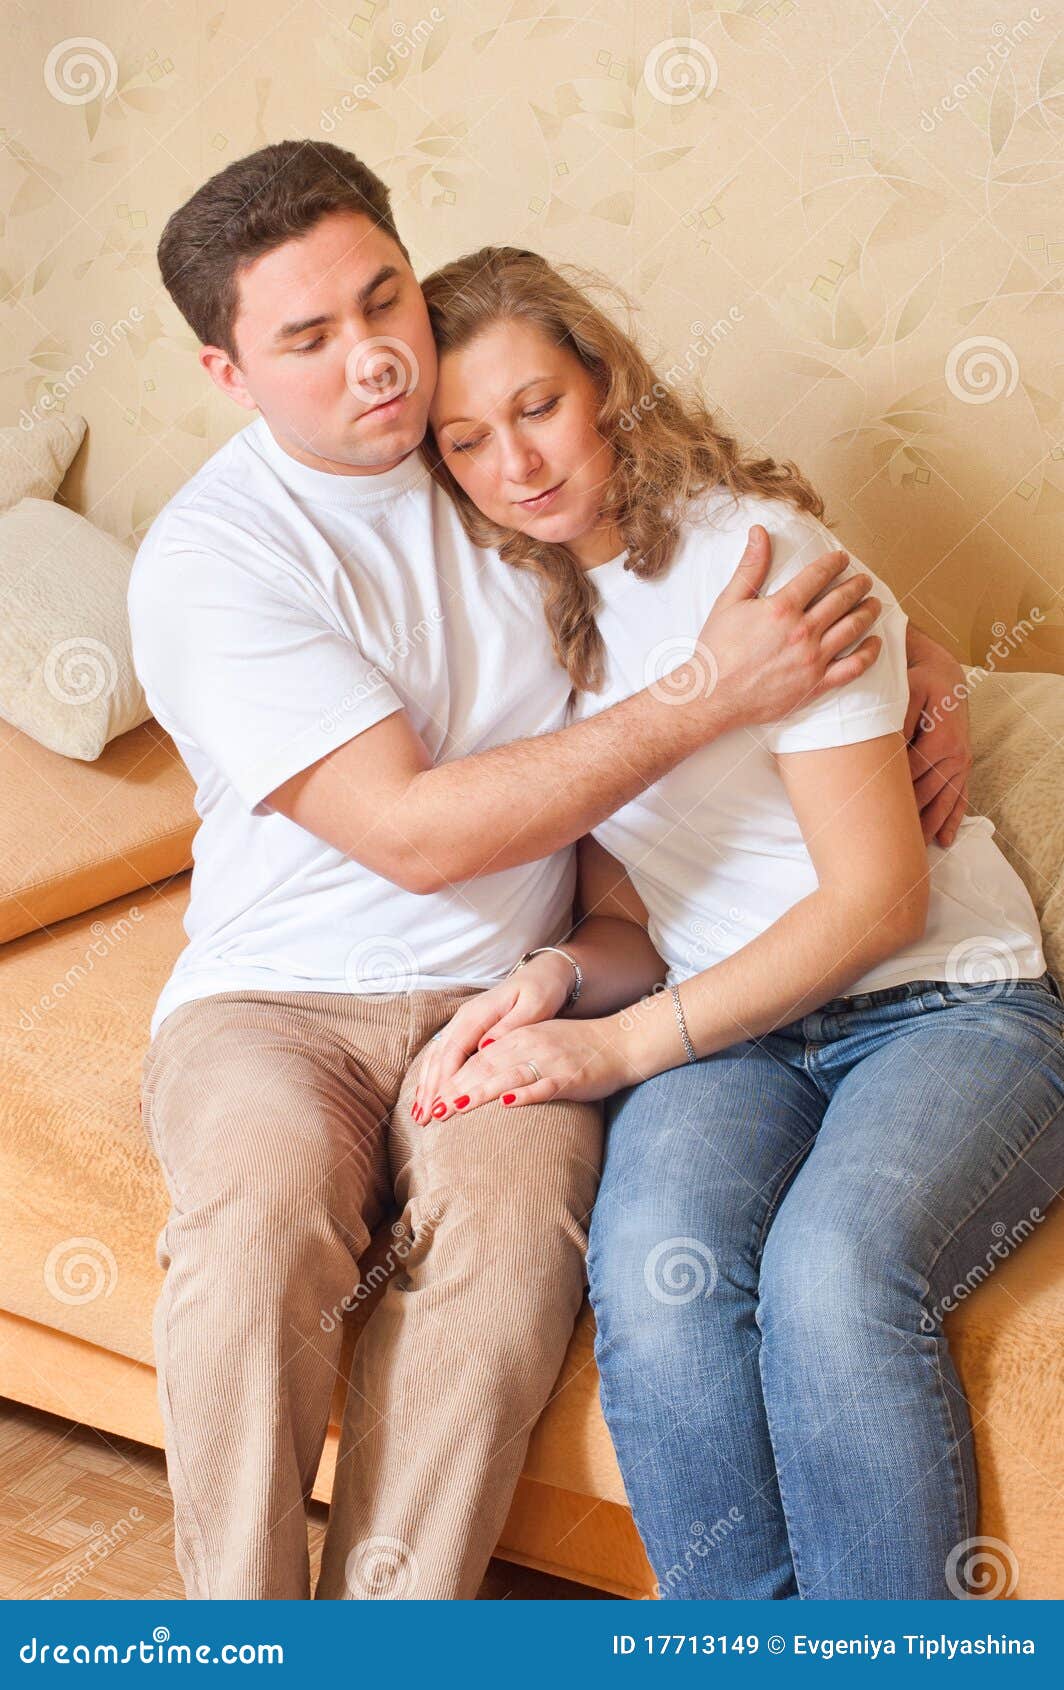 The Husband Feels Sorry for the Wife Stock Image - Image of ...